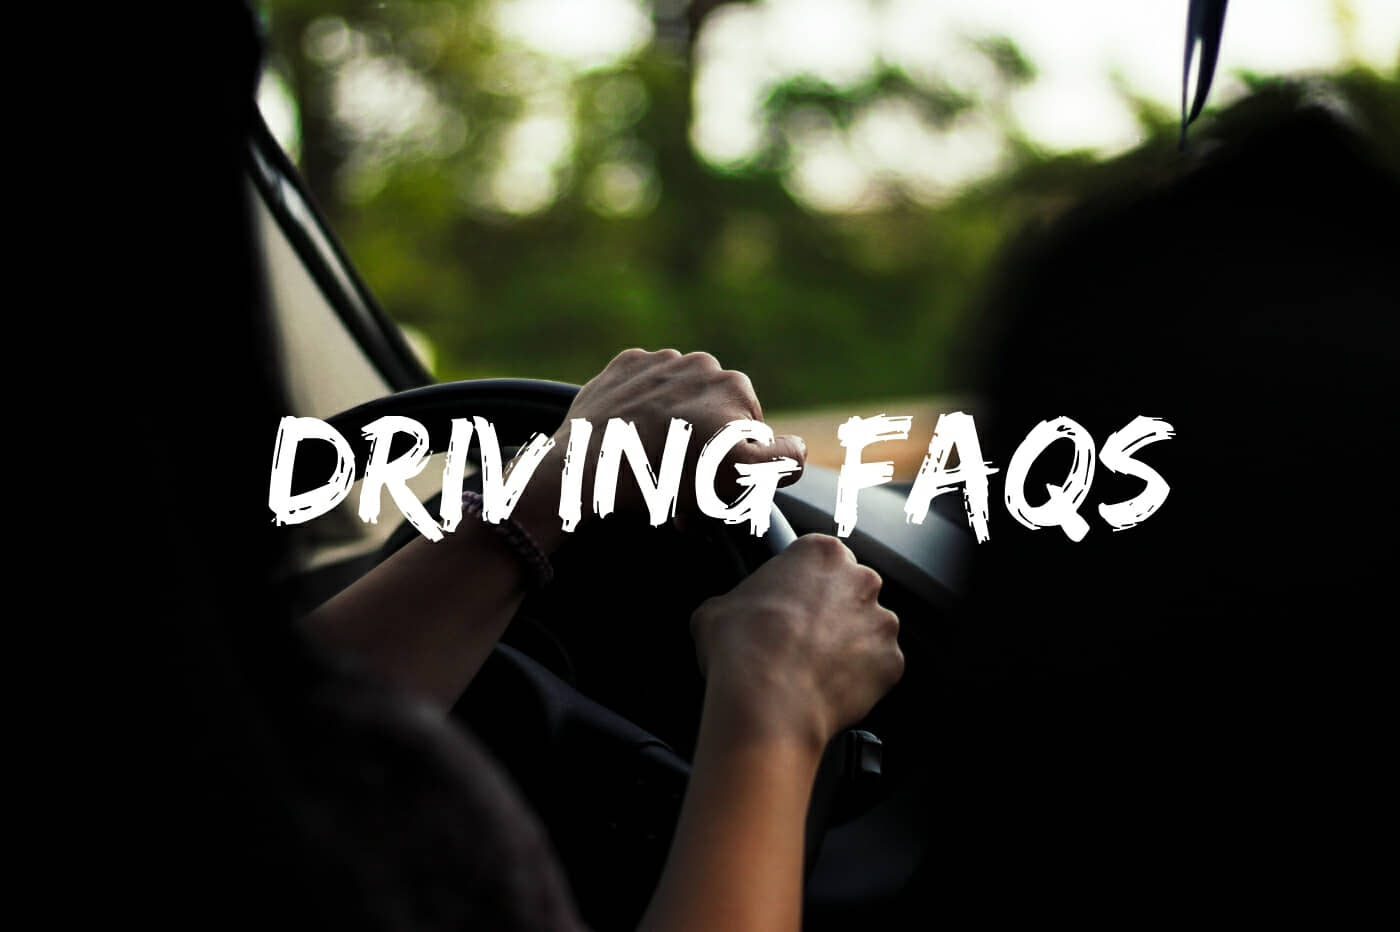 st lucia driving faqs featured image